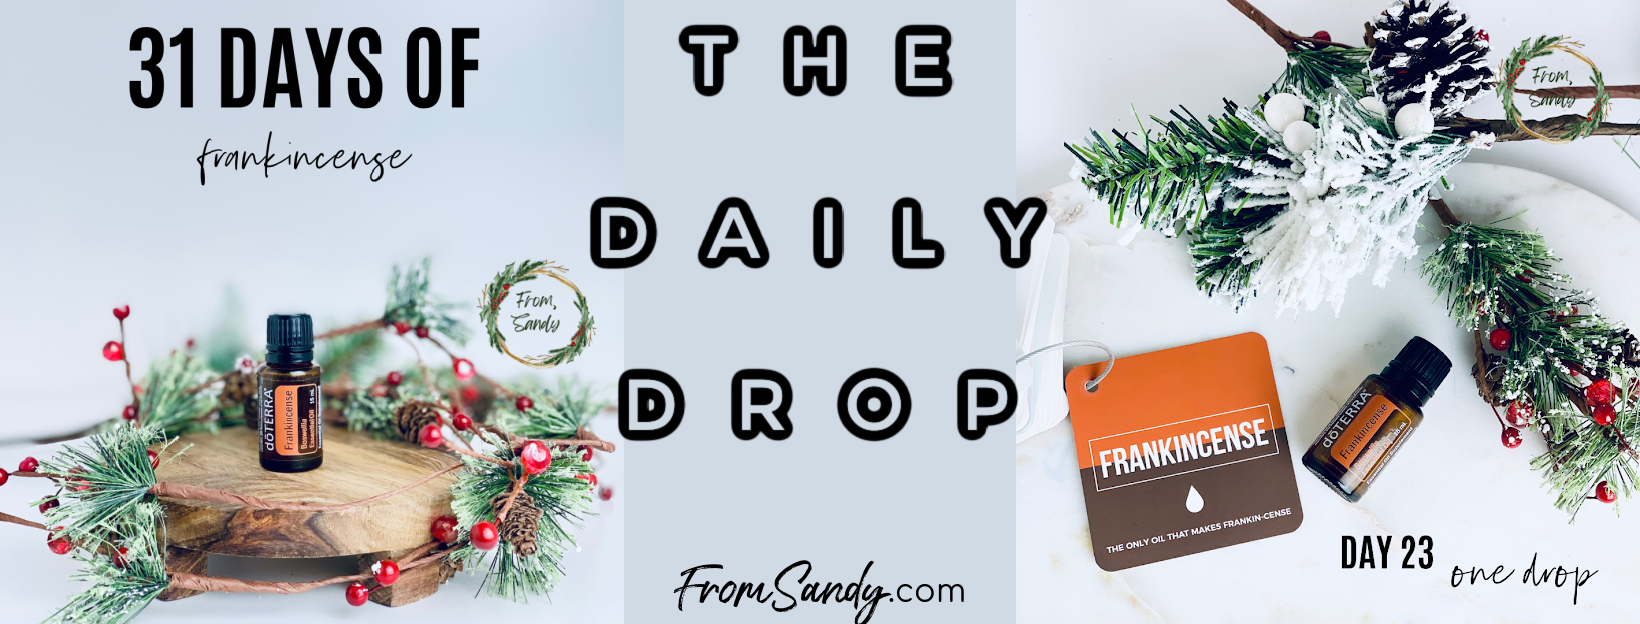 One Drop (31 Days of Frankincense: Day 23), From Sandy